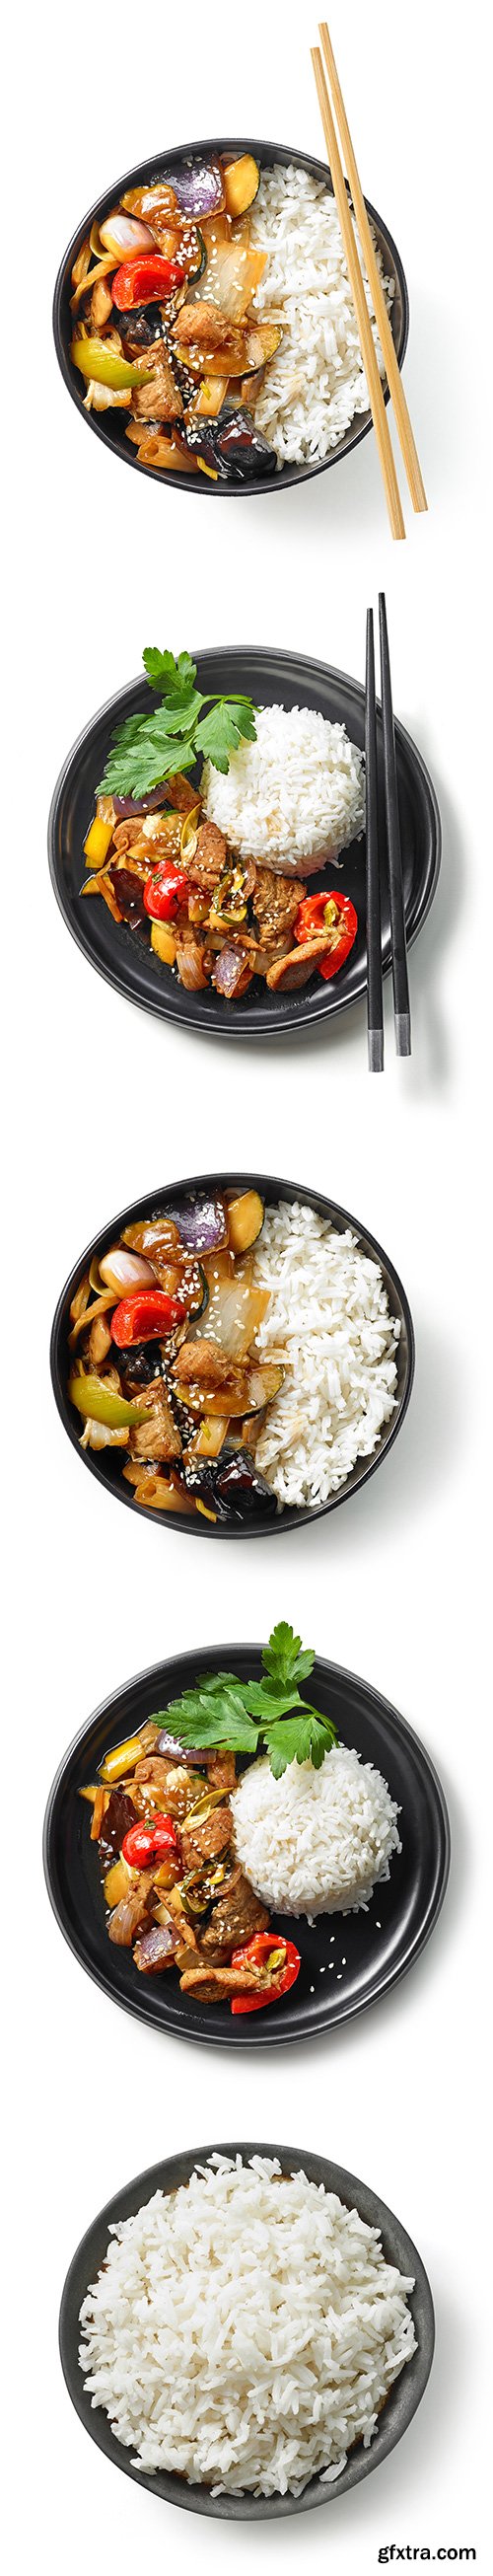 Bowl Of Asian Food Isolated - 5xJPGs